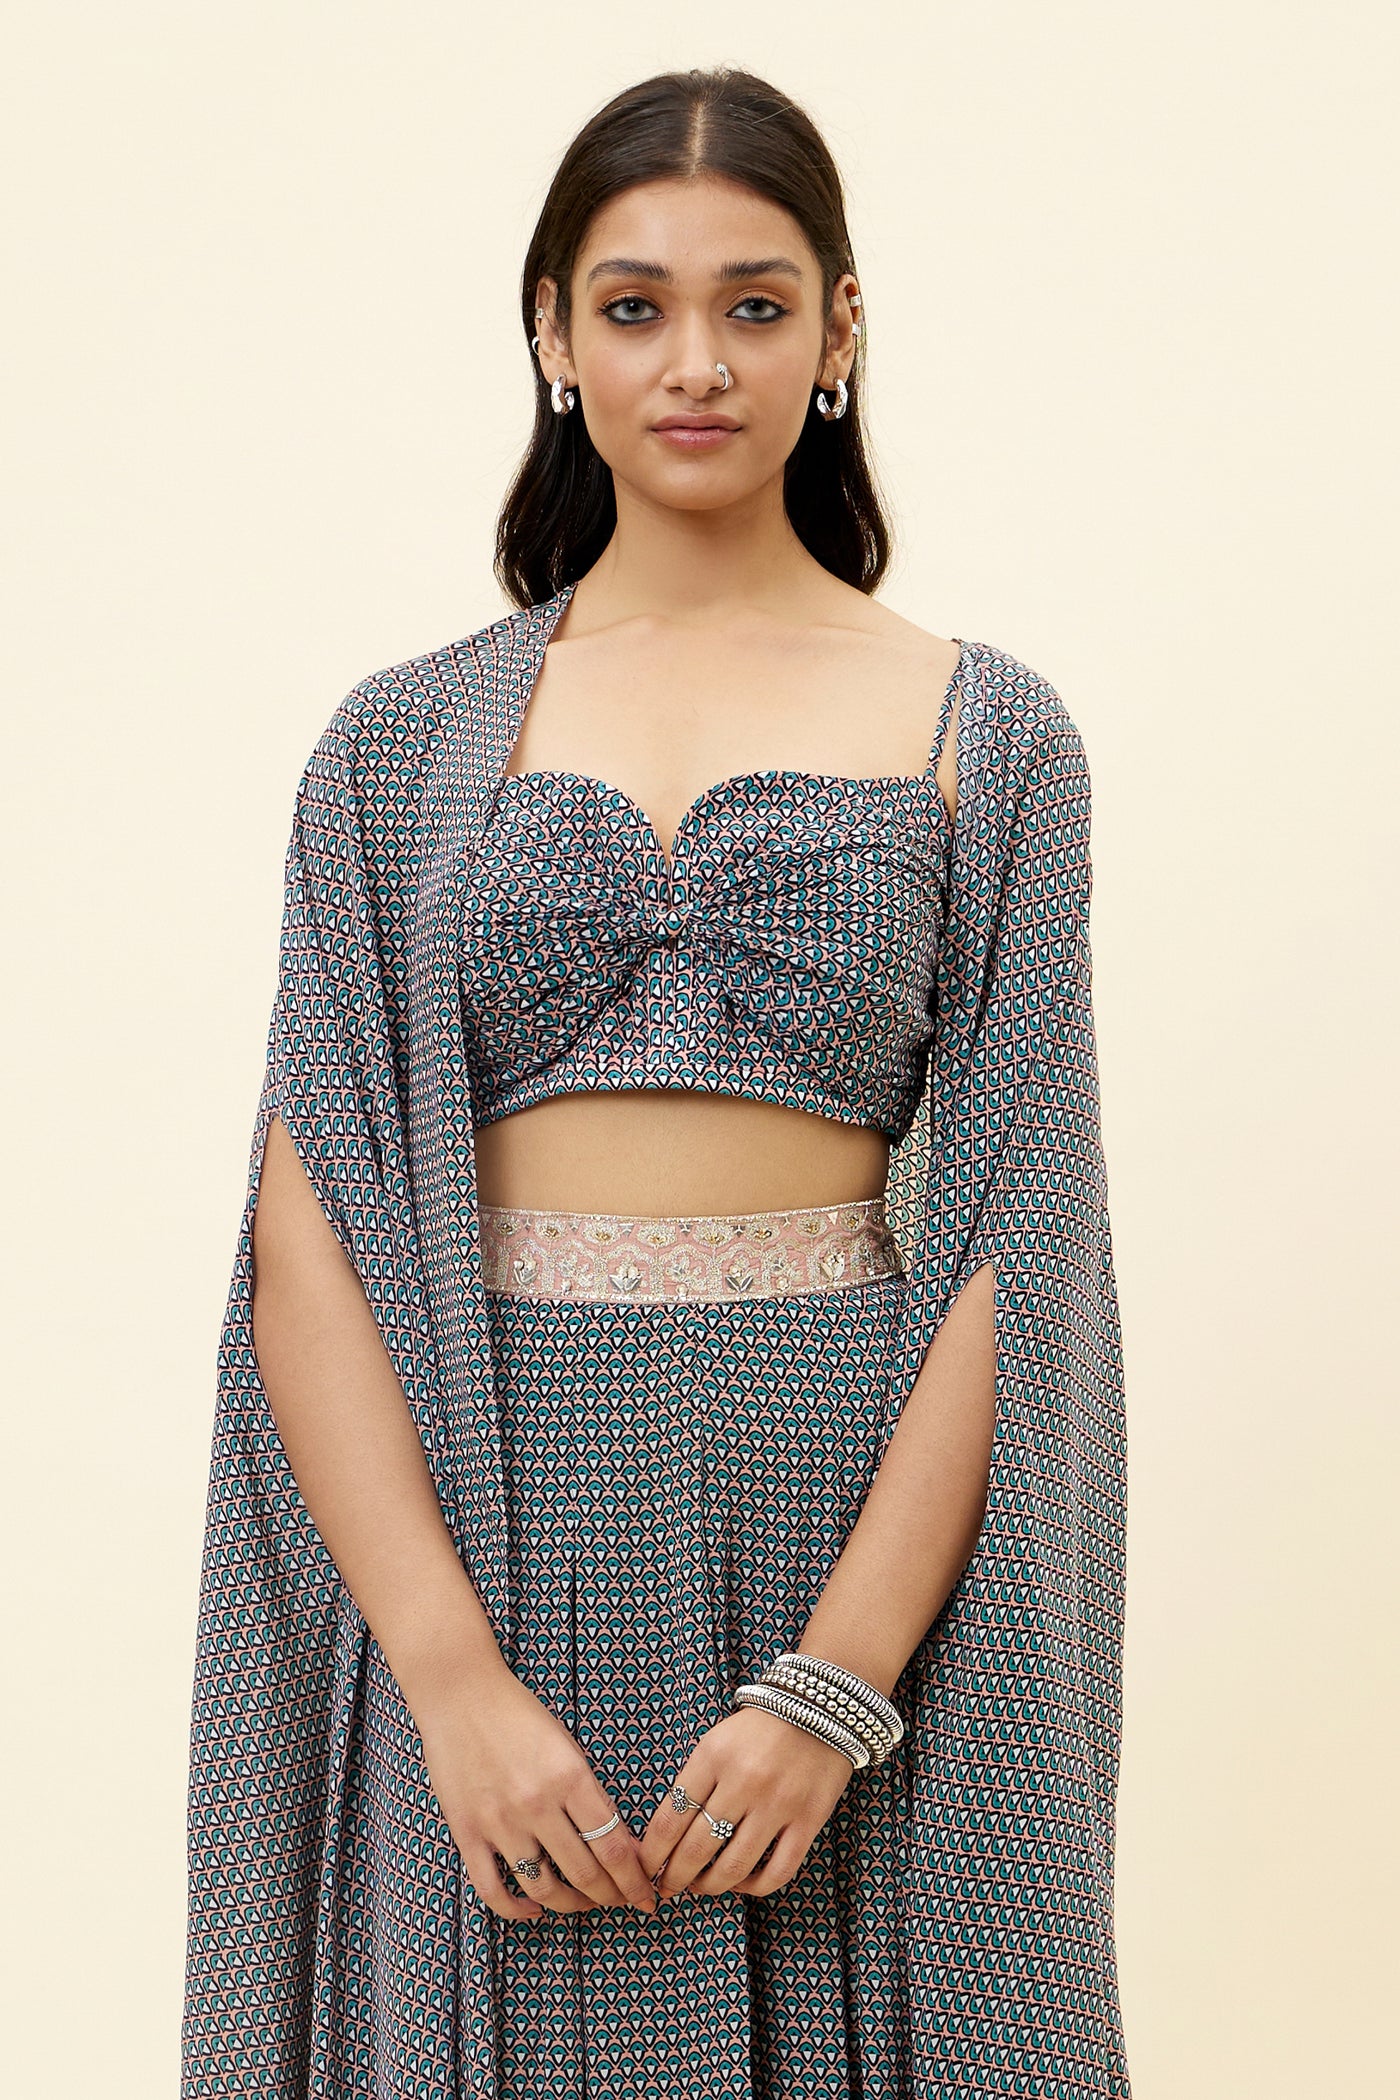 sva Pink Butti Print Box Pleated Pants With Bikini Bustier And Cape online shopping melange singapore indian designer wear